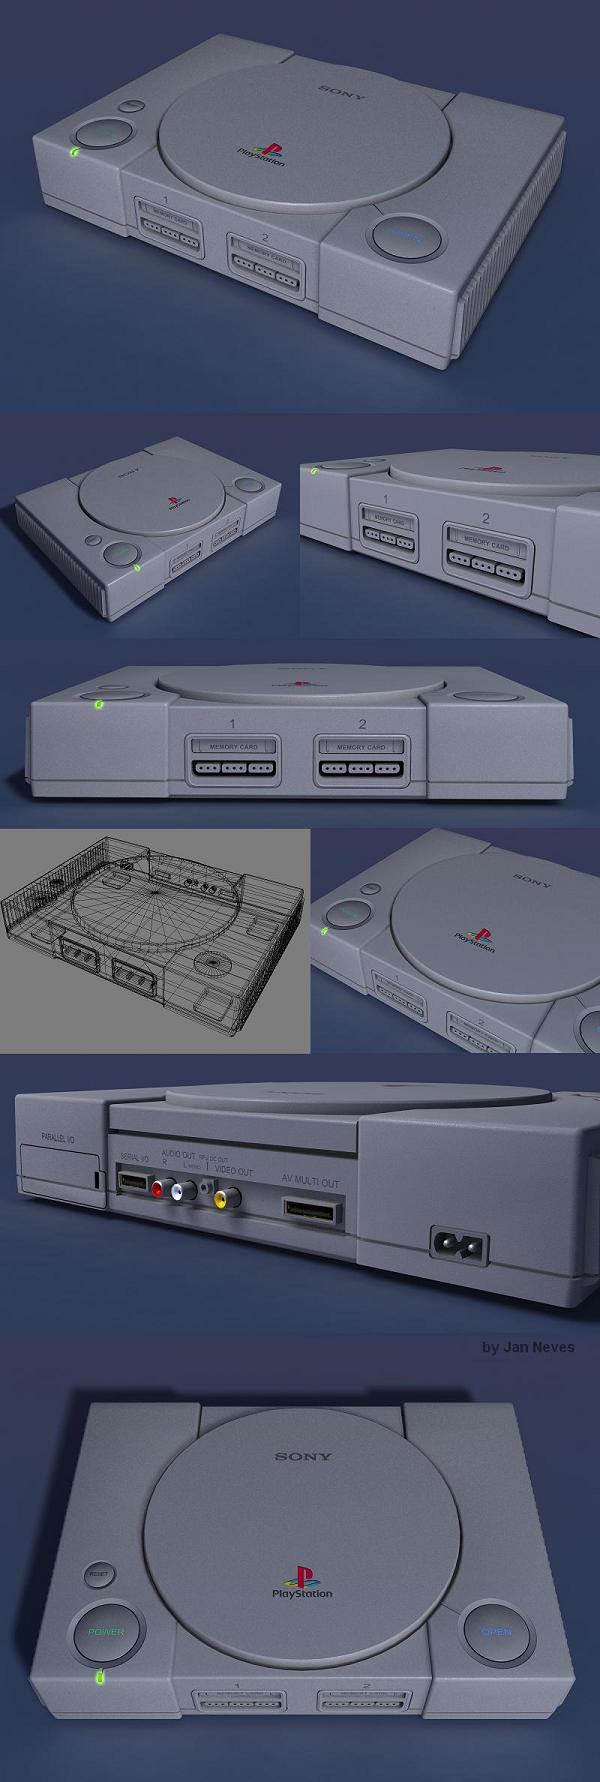 PlayStation (1) 3D Model - Off-Topic Giant Bomb